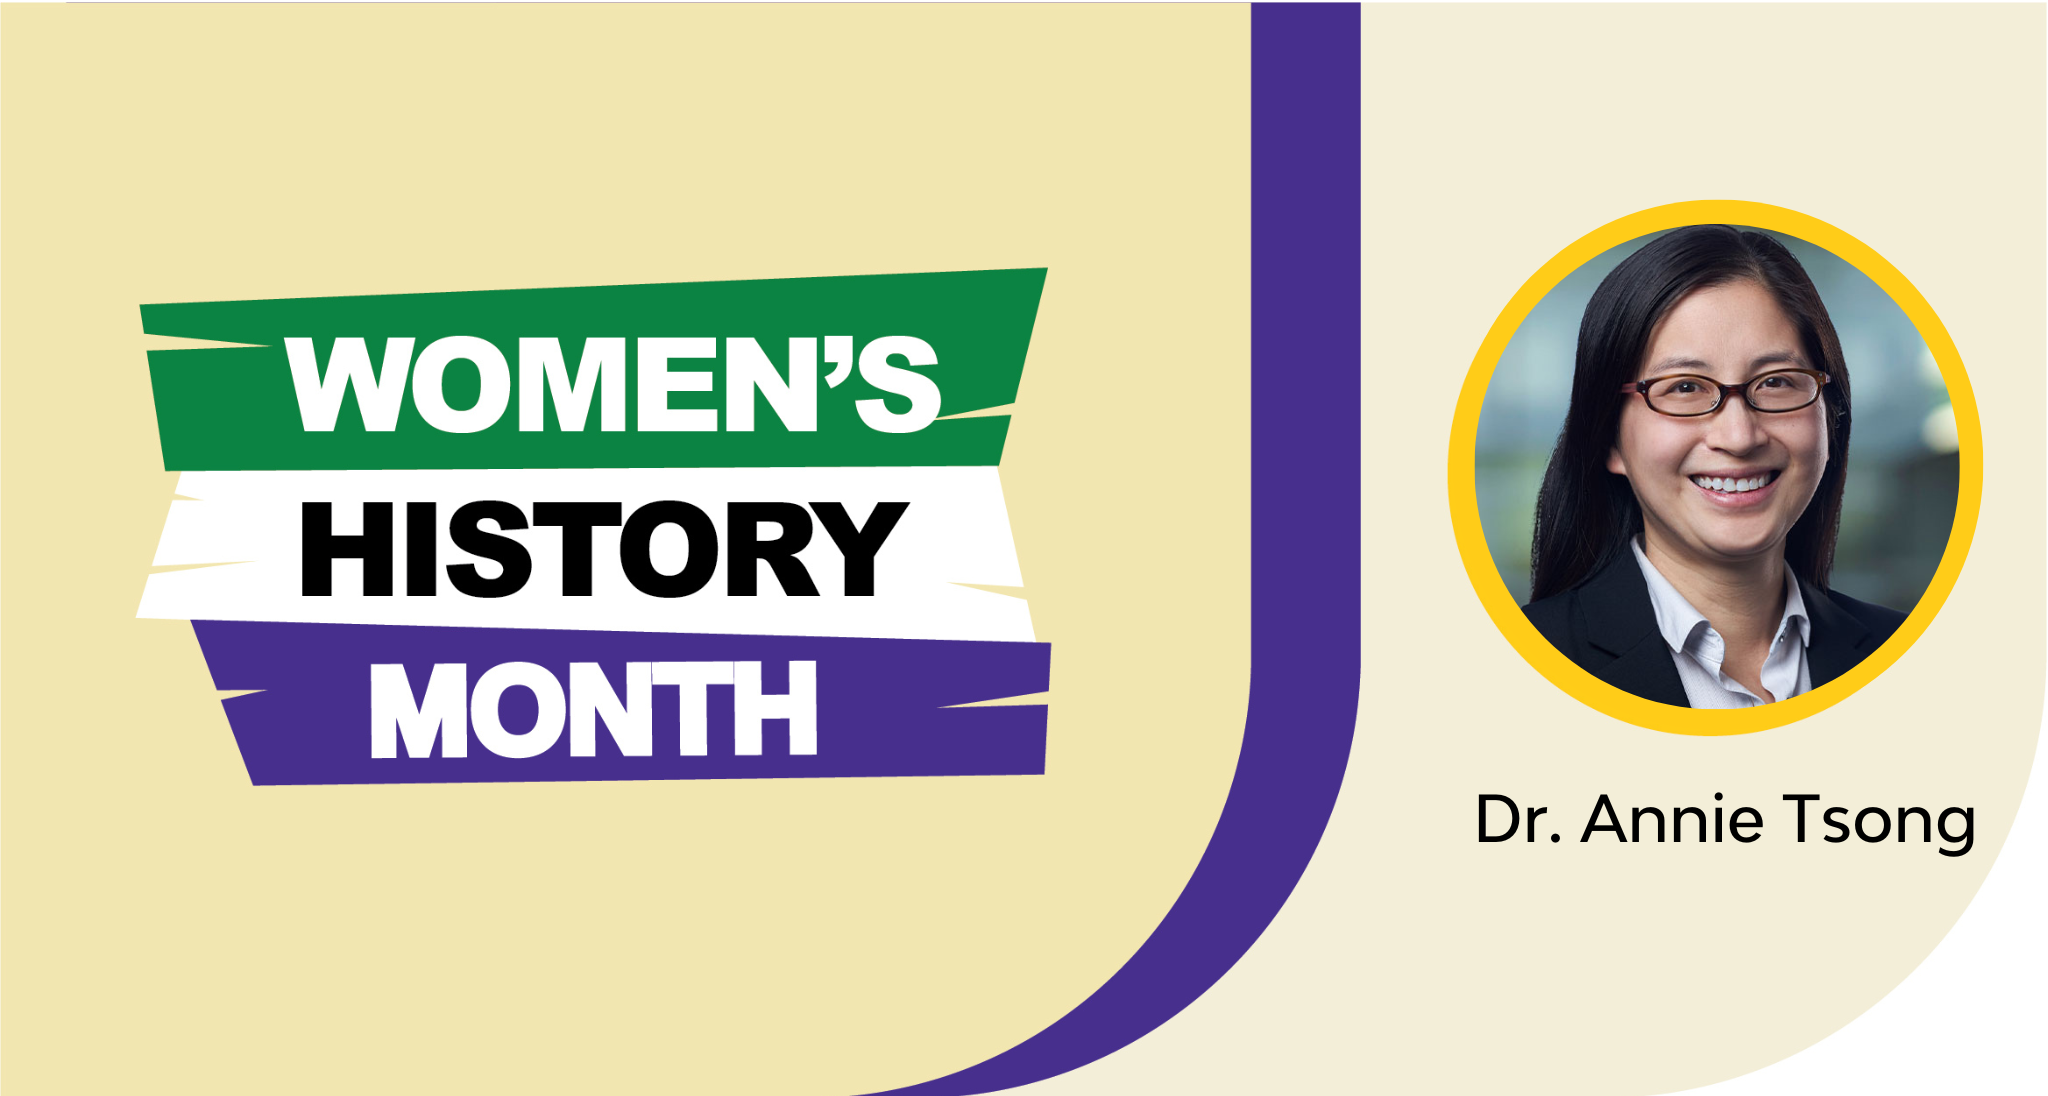 Women's History Month: Dr. Annie Tsong